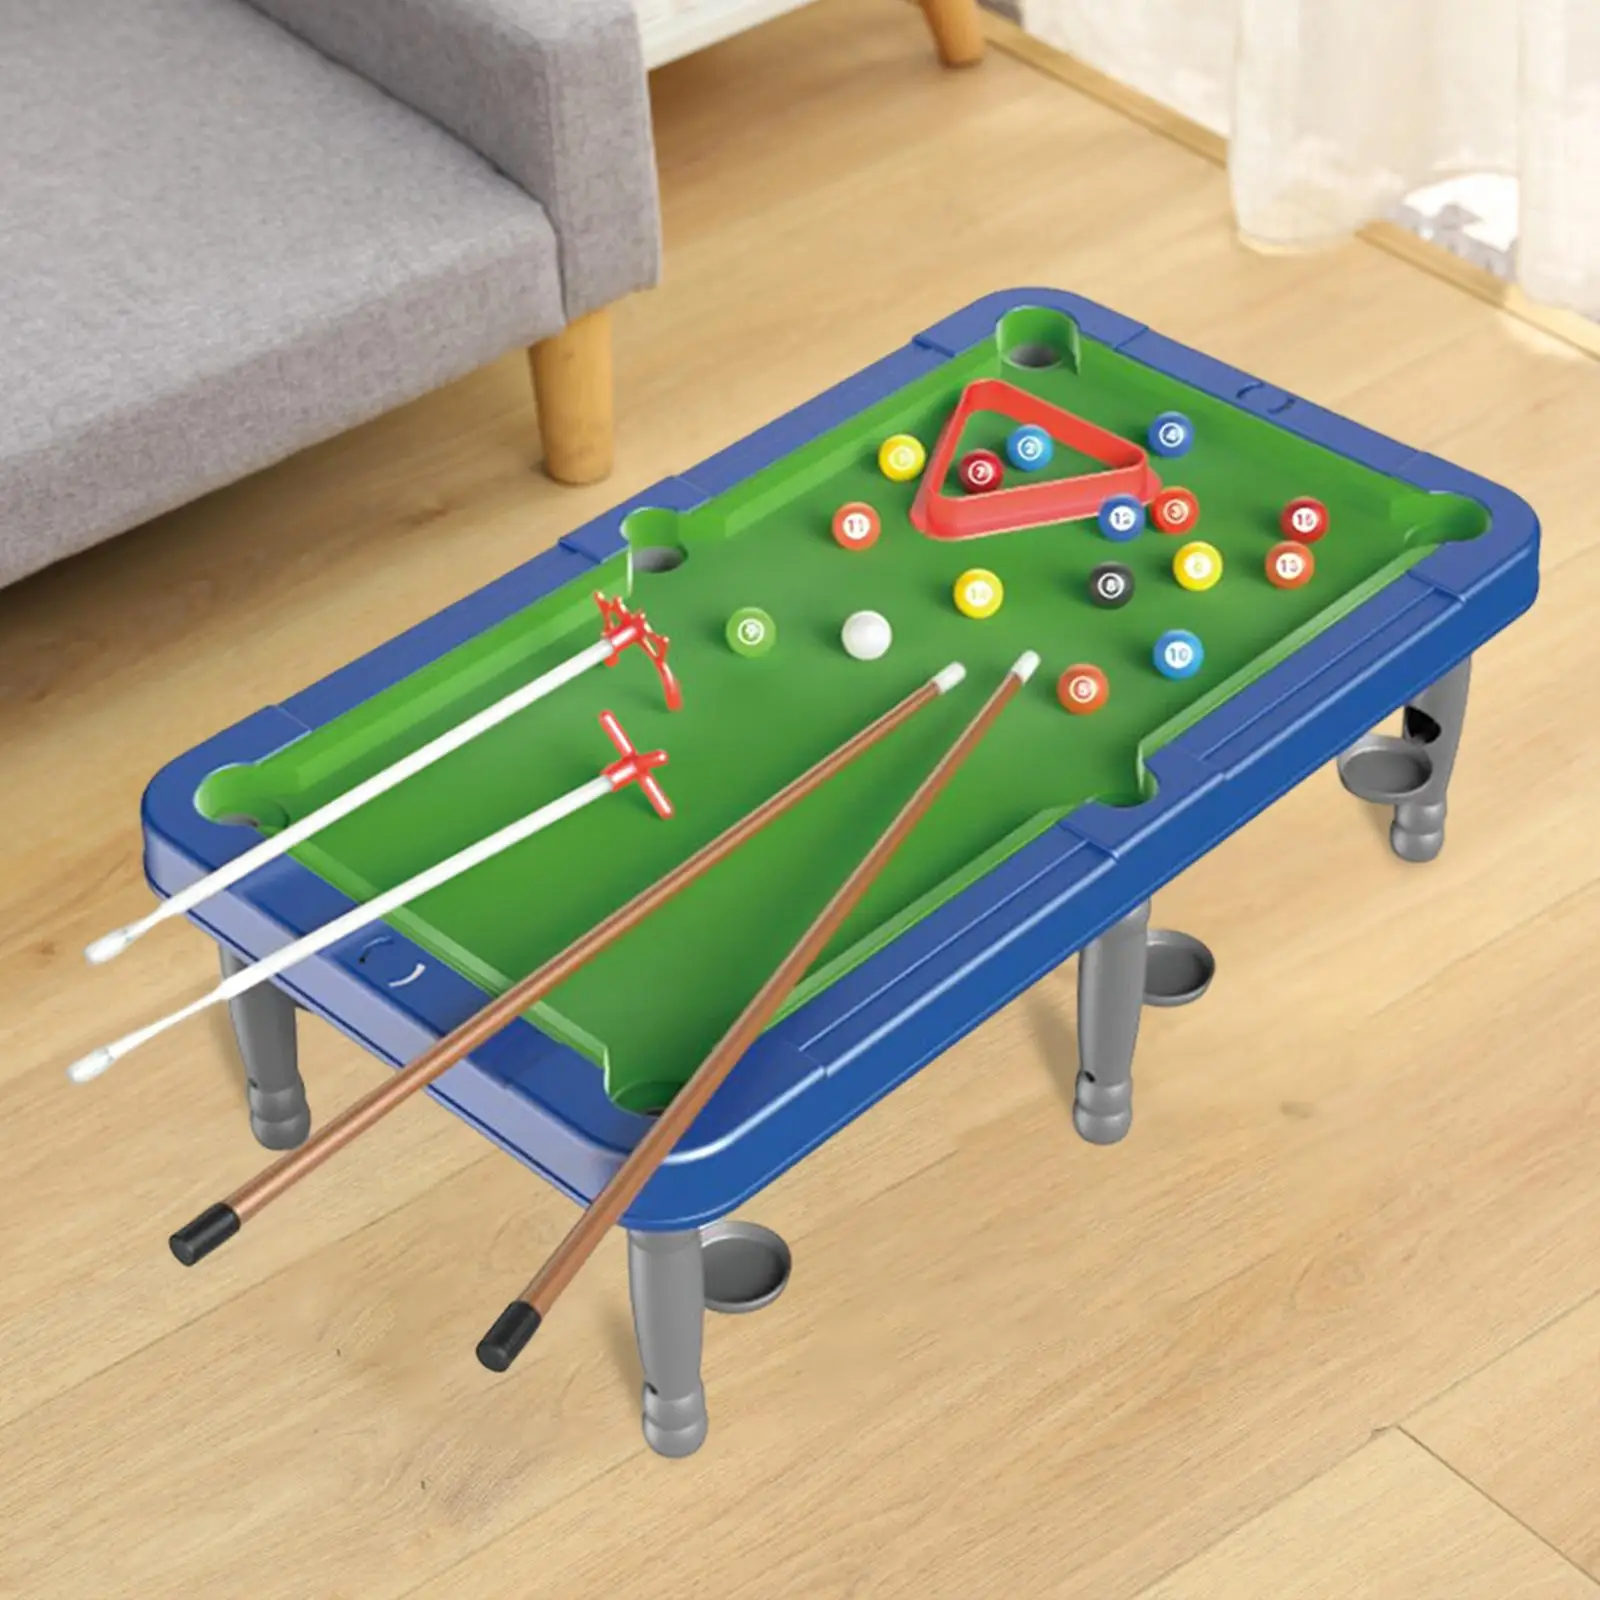 Portable Tabletop Billiards Chalk, Racking Triangle Home Use Board Games Game Toy Desktop Snooker for Boys Girls Children Family